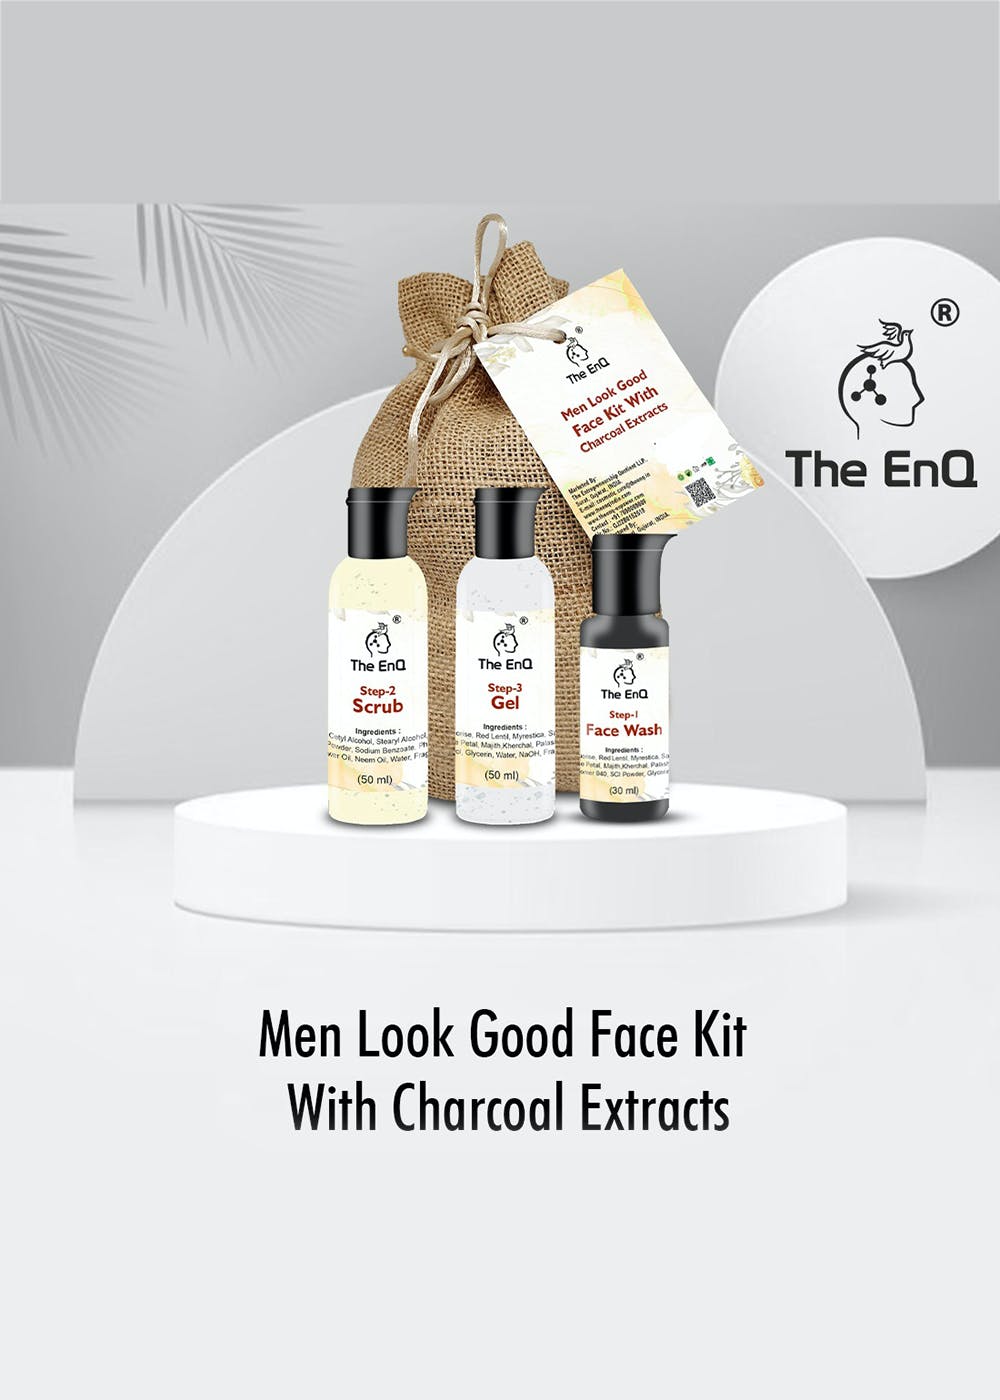  Men Look Good Face Kit With Charcoal Extracts 130gm